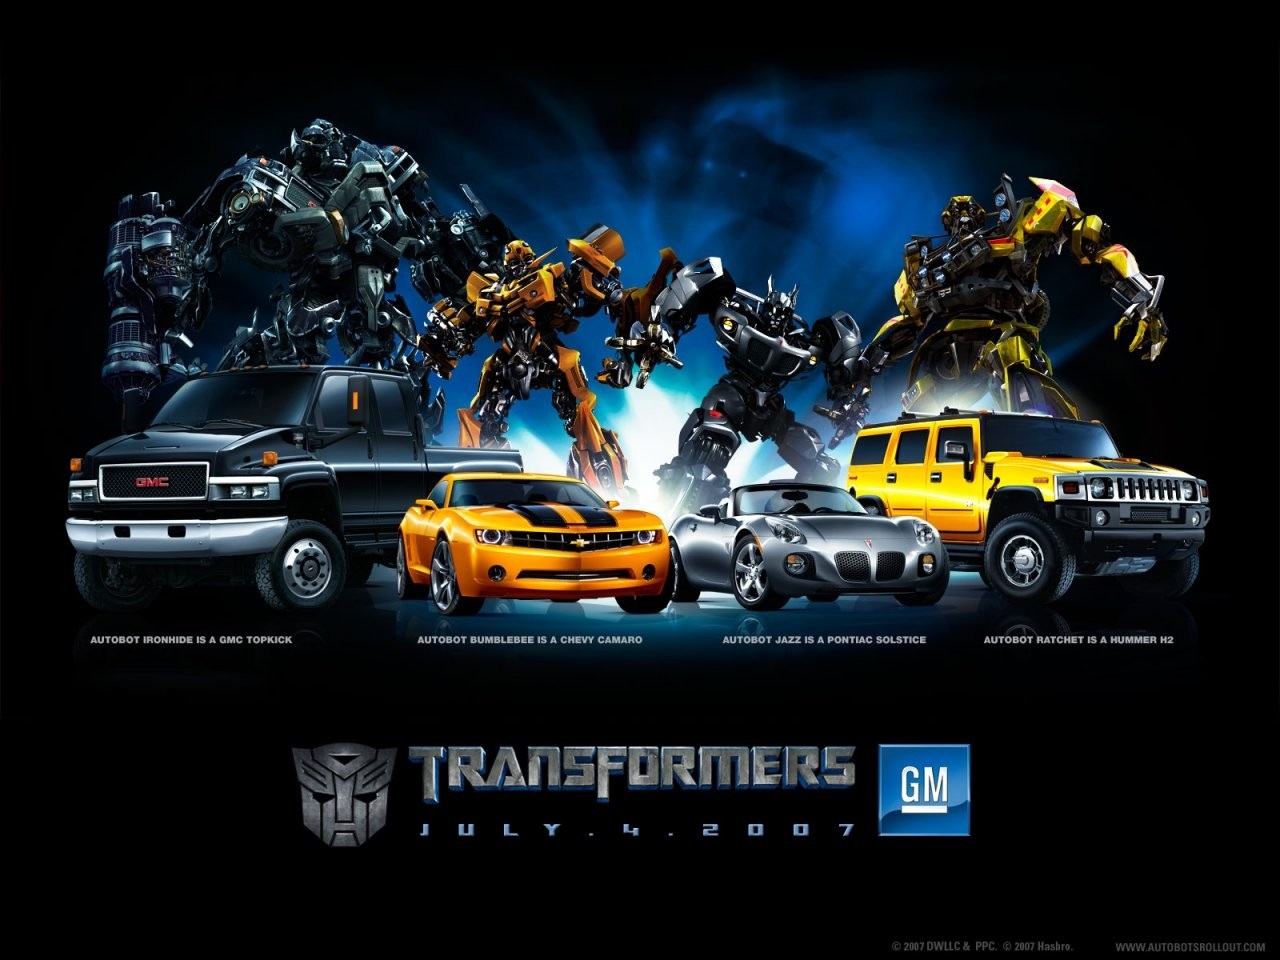  Autobots Wallpaper HD wallpaper and background photos 24079233